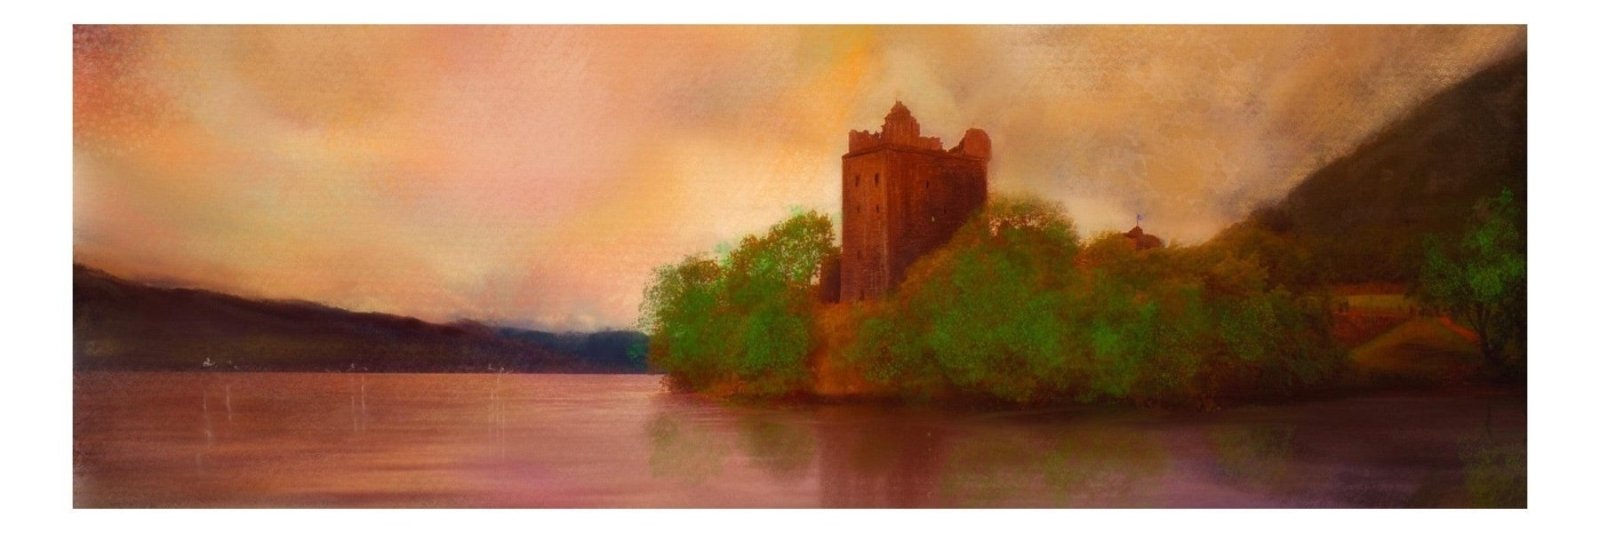 Urquhart Castle Dusk-Panoramic Prints-Scottish Castles Art Gallery-Paintings, Prints, Homeware, Art Gifts From Scotland By Scottish Artist Kevin Hunter